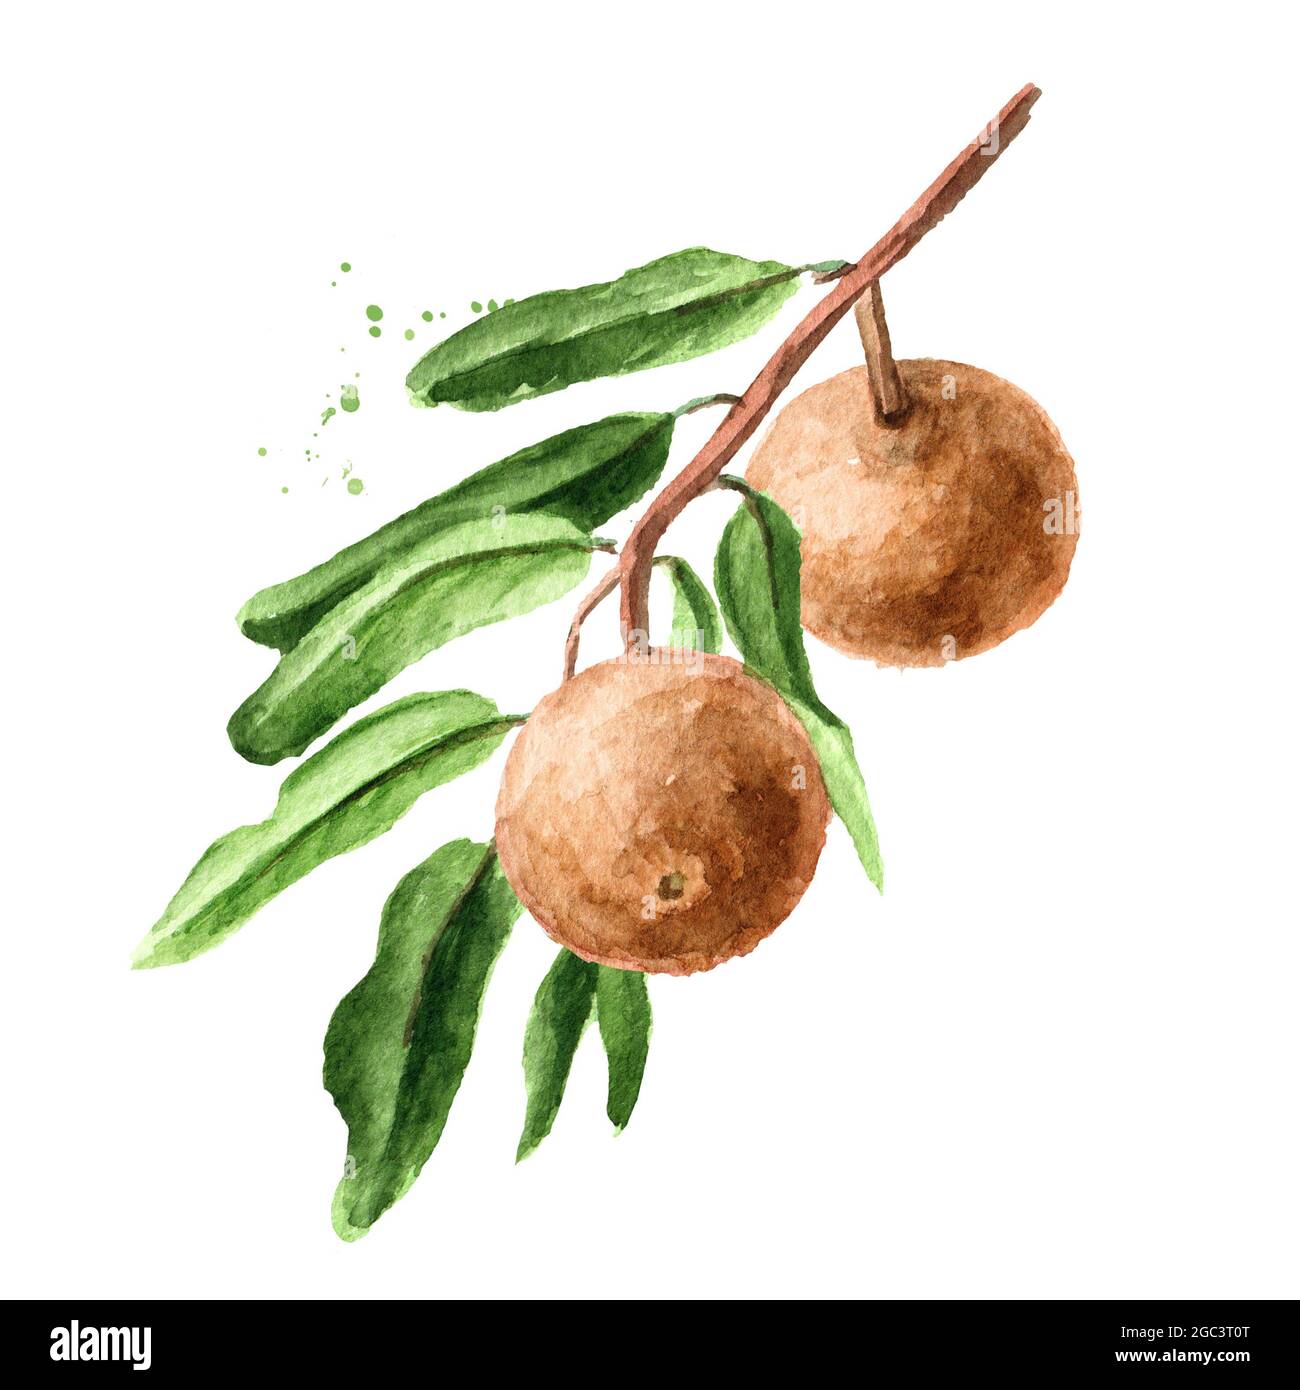 Tropical Fruit Hydnocarpus anthelminthicus or Chaulmoogra on the branch with leaves, Watercolor hand drawn illustration, isolated on white background Stock Photo